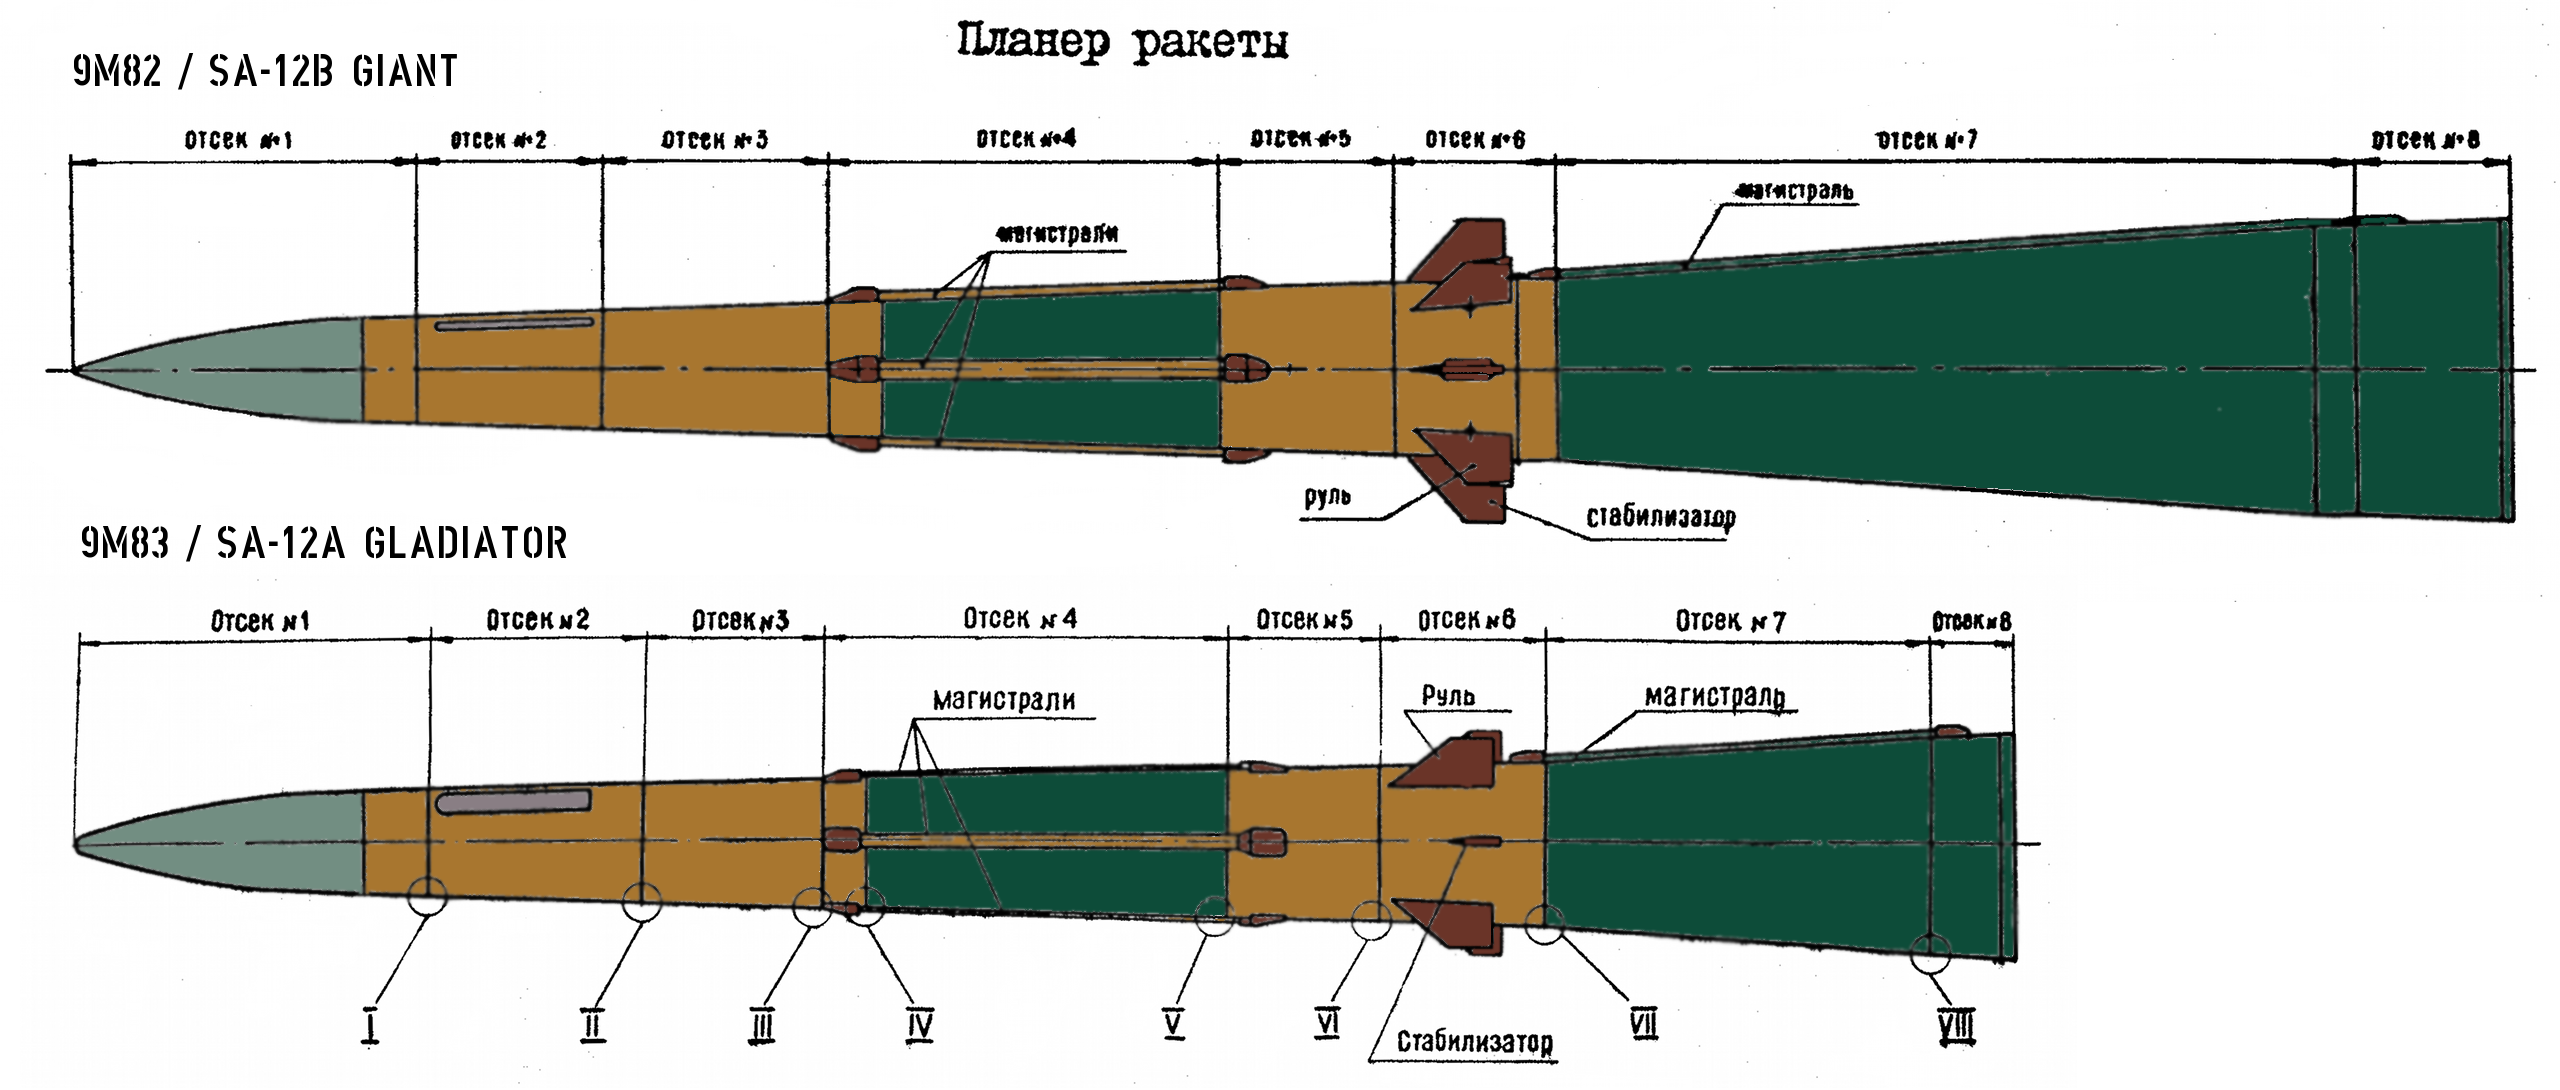 9M82+9M83-Missile-Layout-AC.png